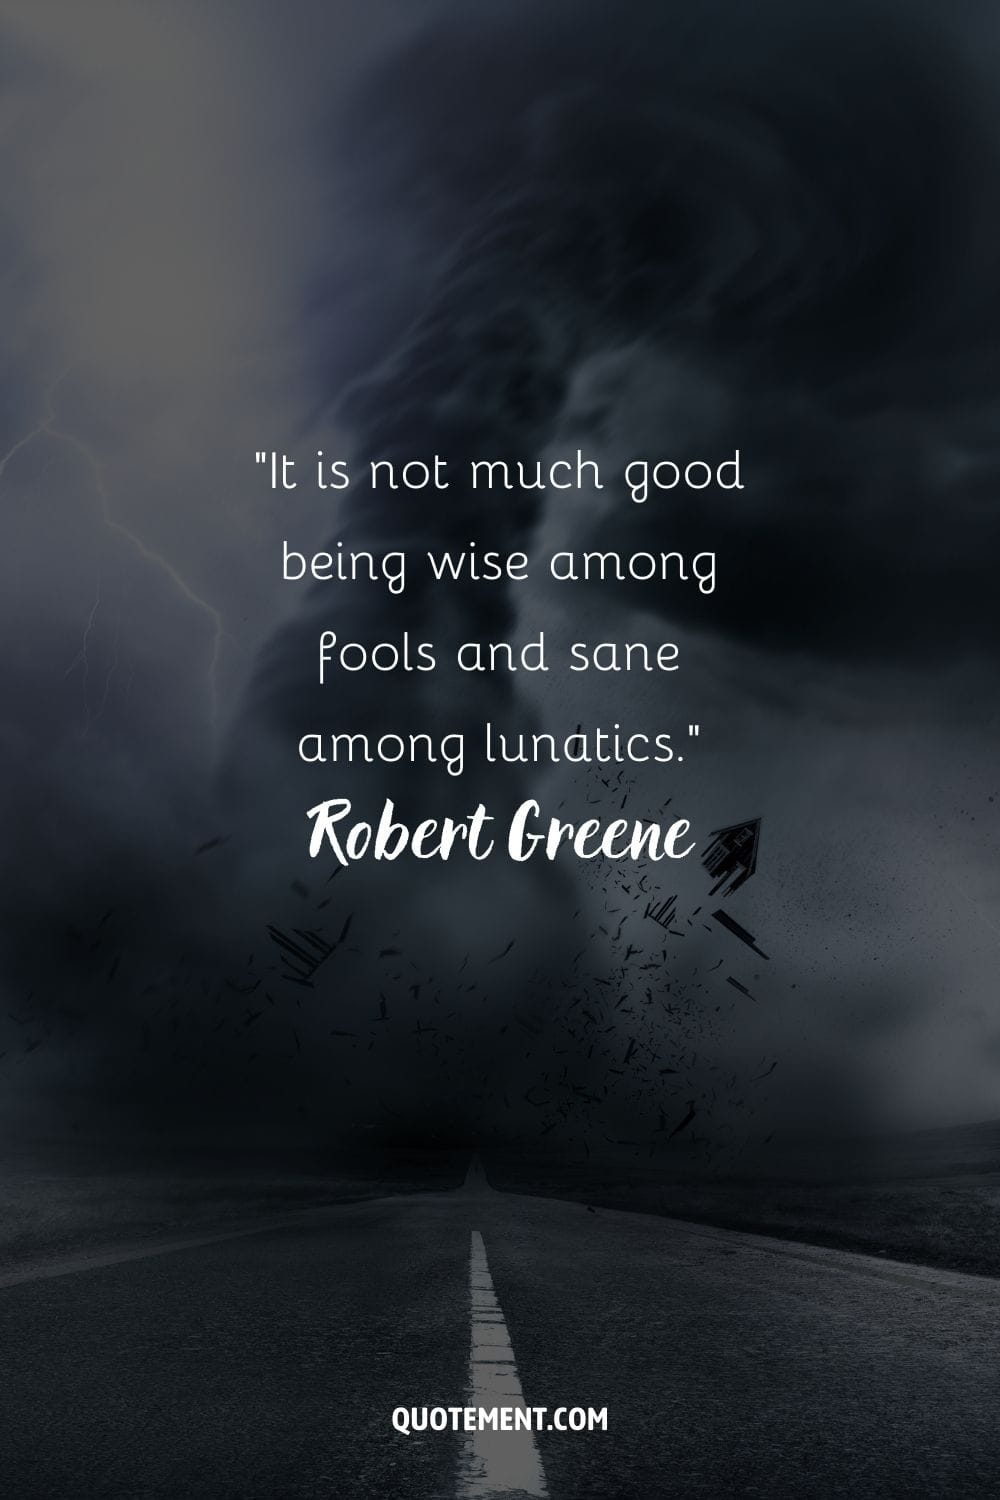 “It is not much good being wise among fools and sane among lunatics.” ― Robert Greene, The 48 Laws of Power